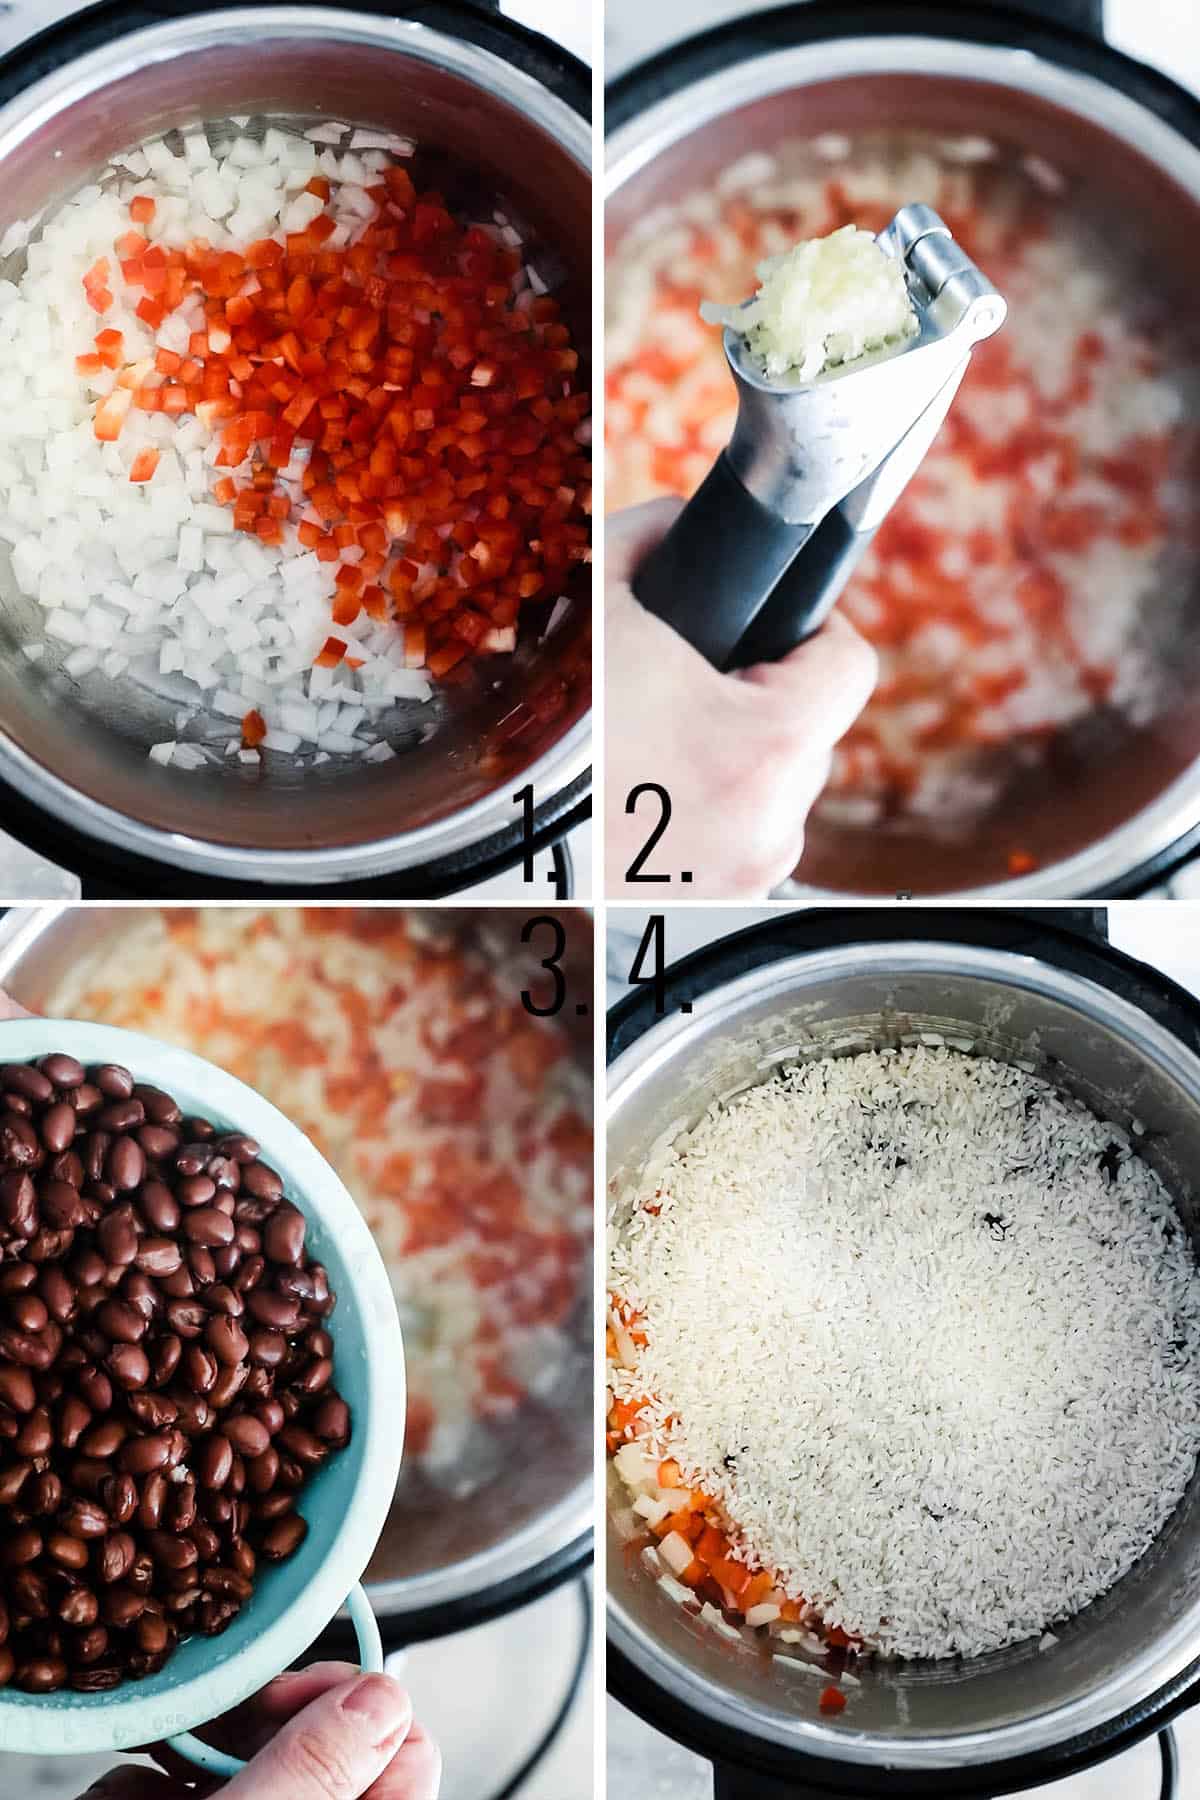 How to make Caribbean rice and beans in the instant pot.